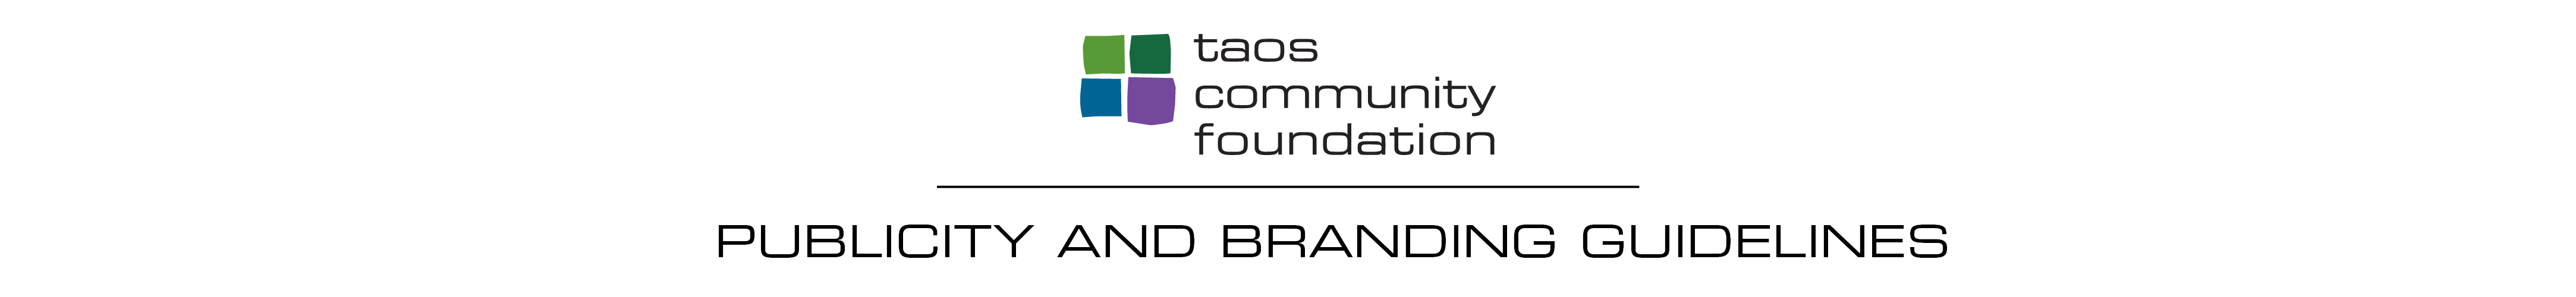 Taos Community Foundation Publicity and Branding Guidelines Header